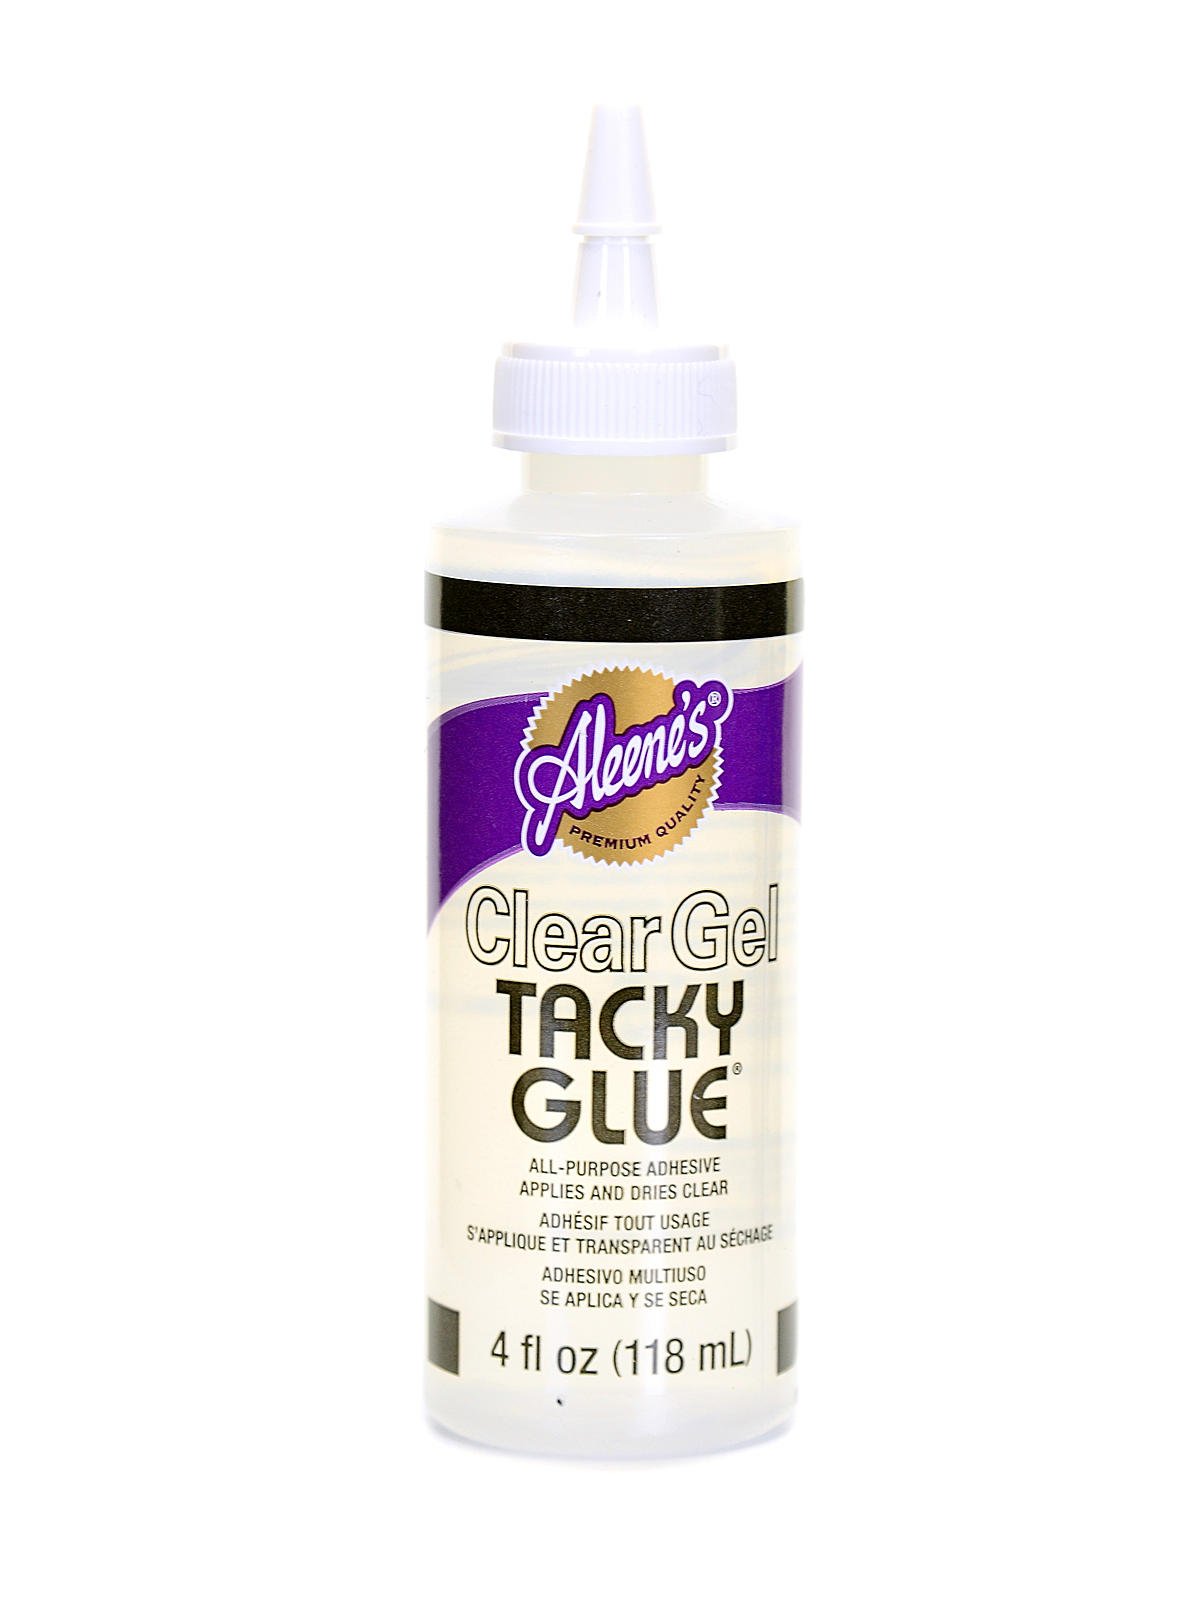 Aleene's Clear Gel Tacky Glue - Colle tous usages